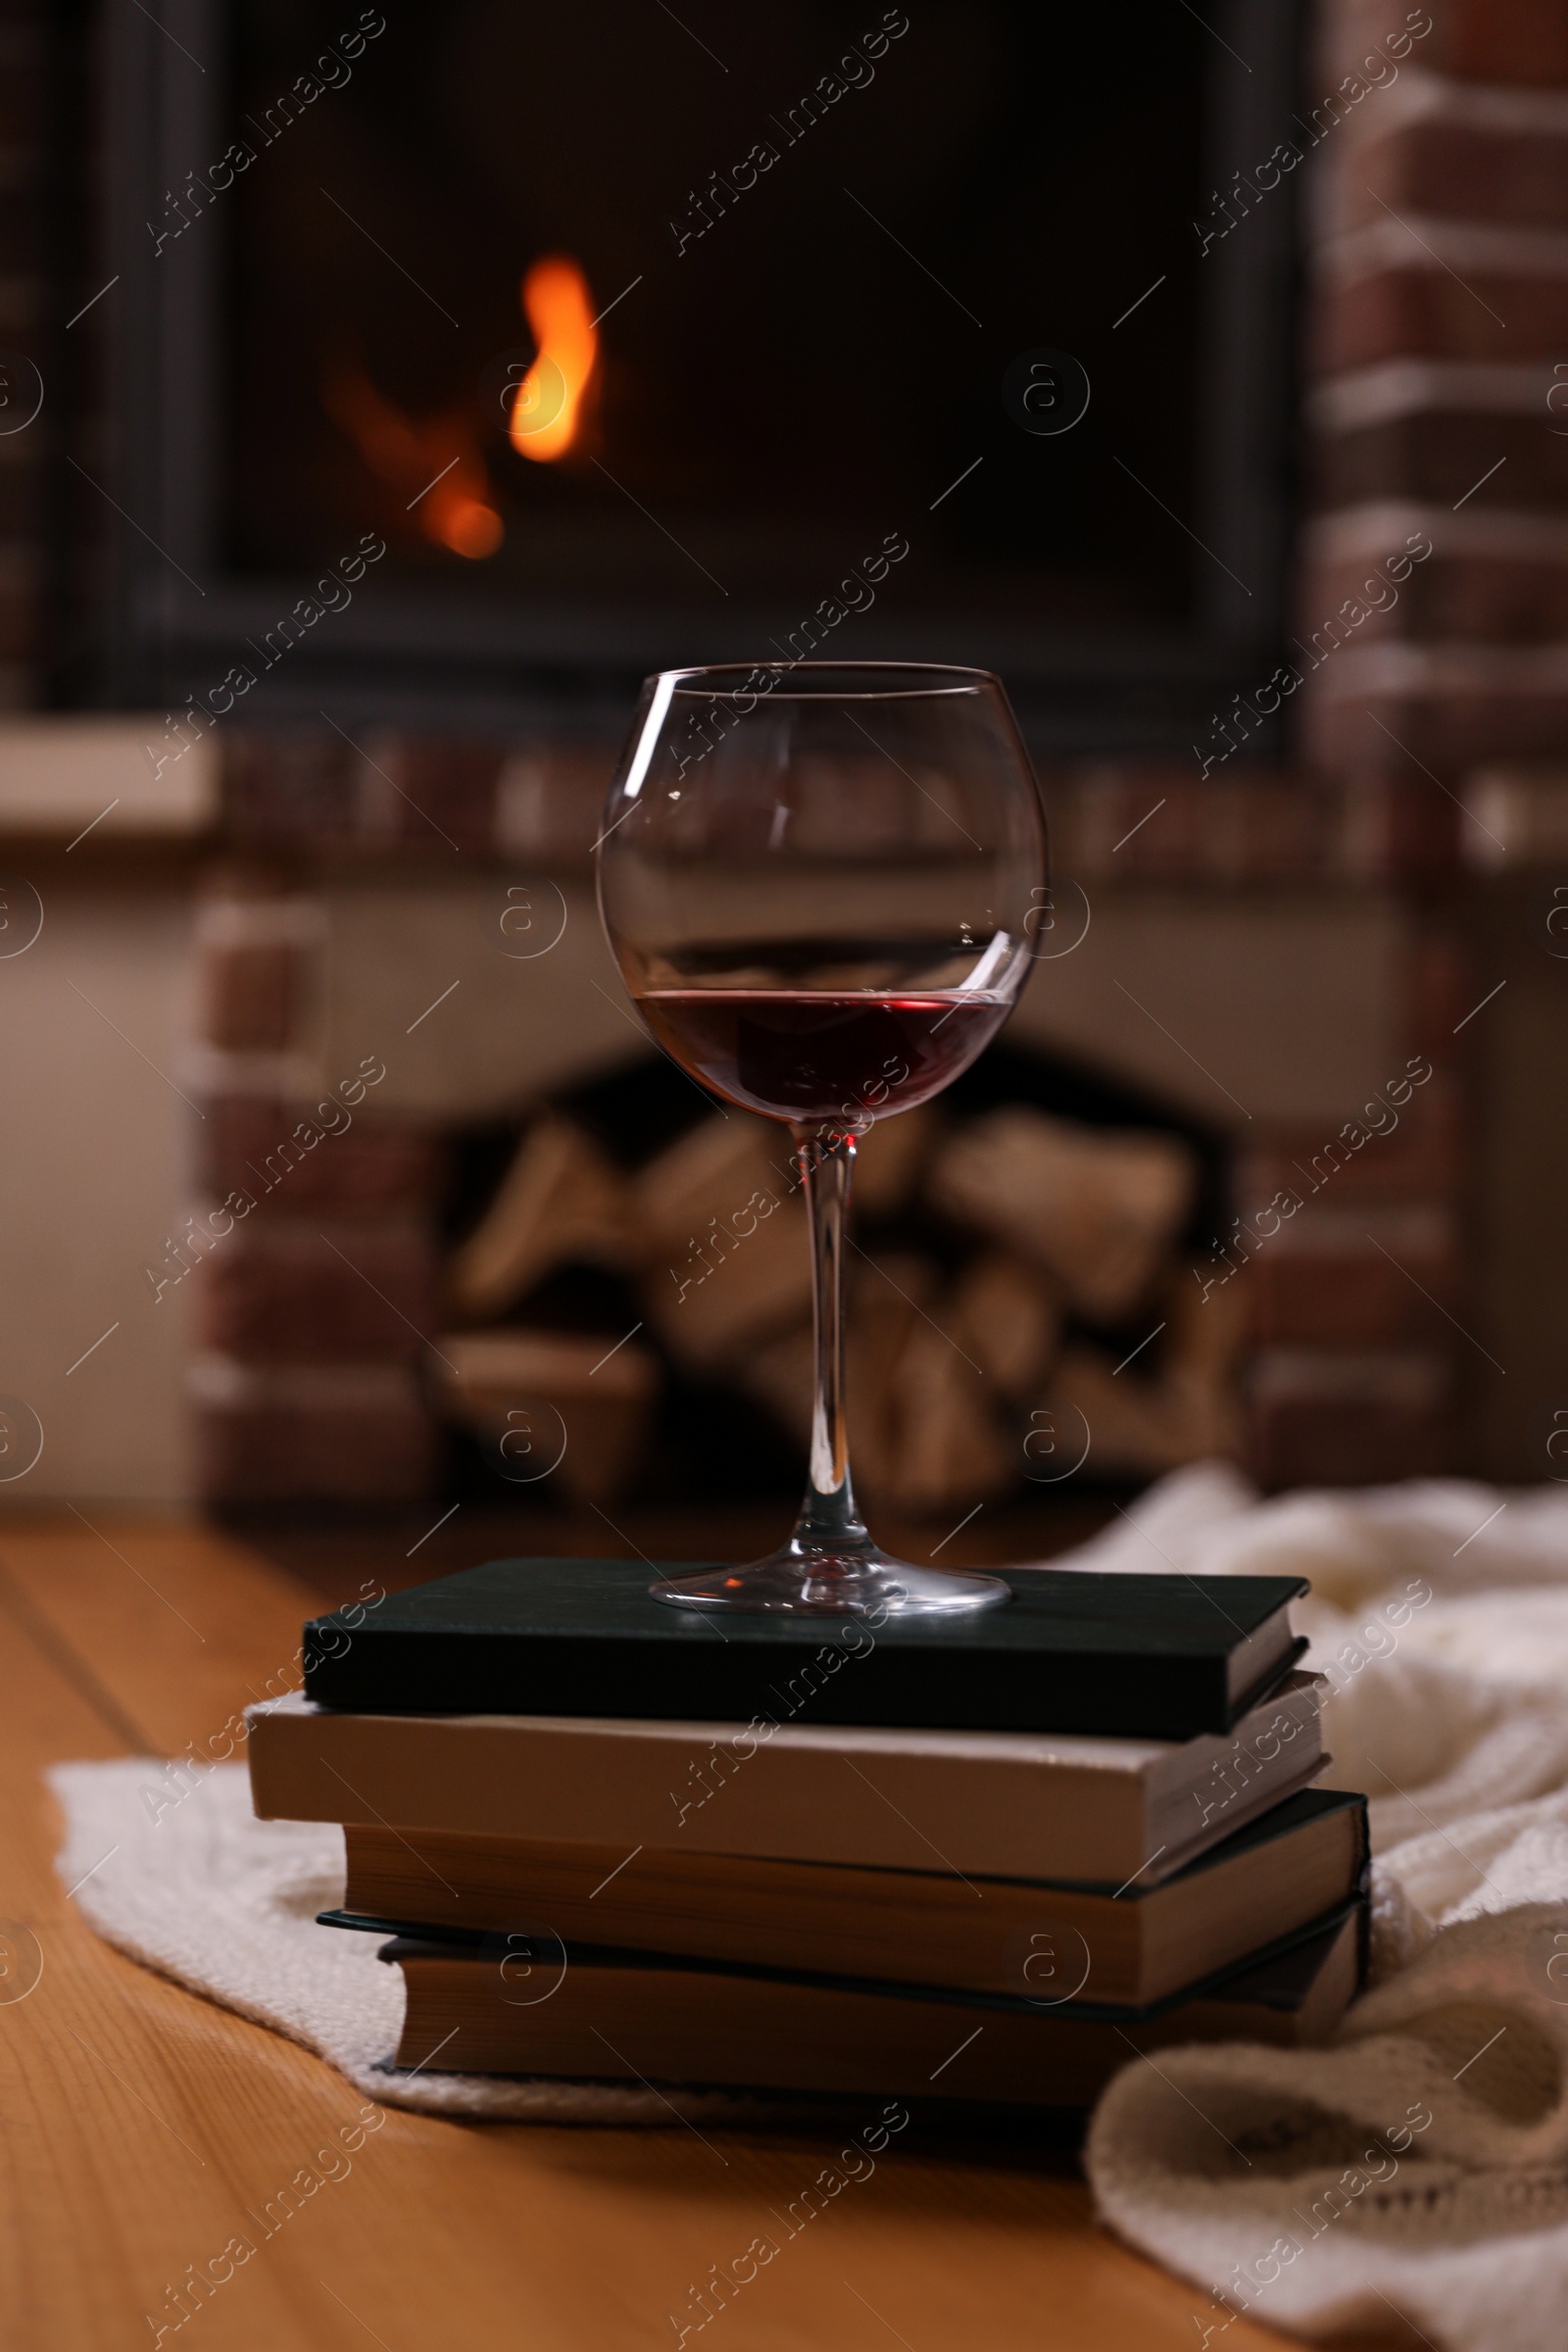 Photo of Glass of wine on books near fireplace indoors